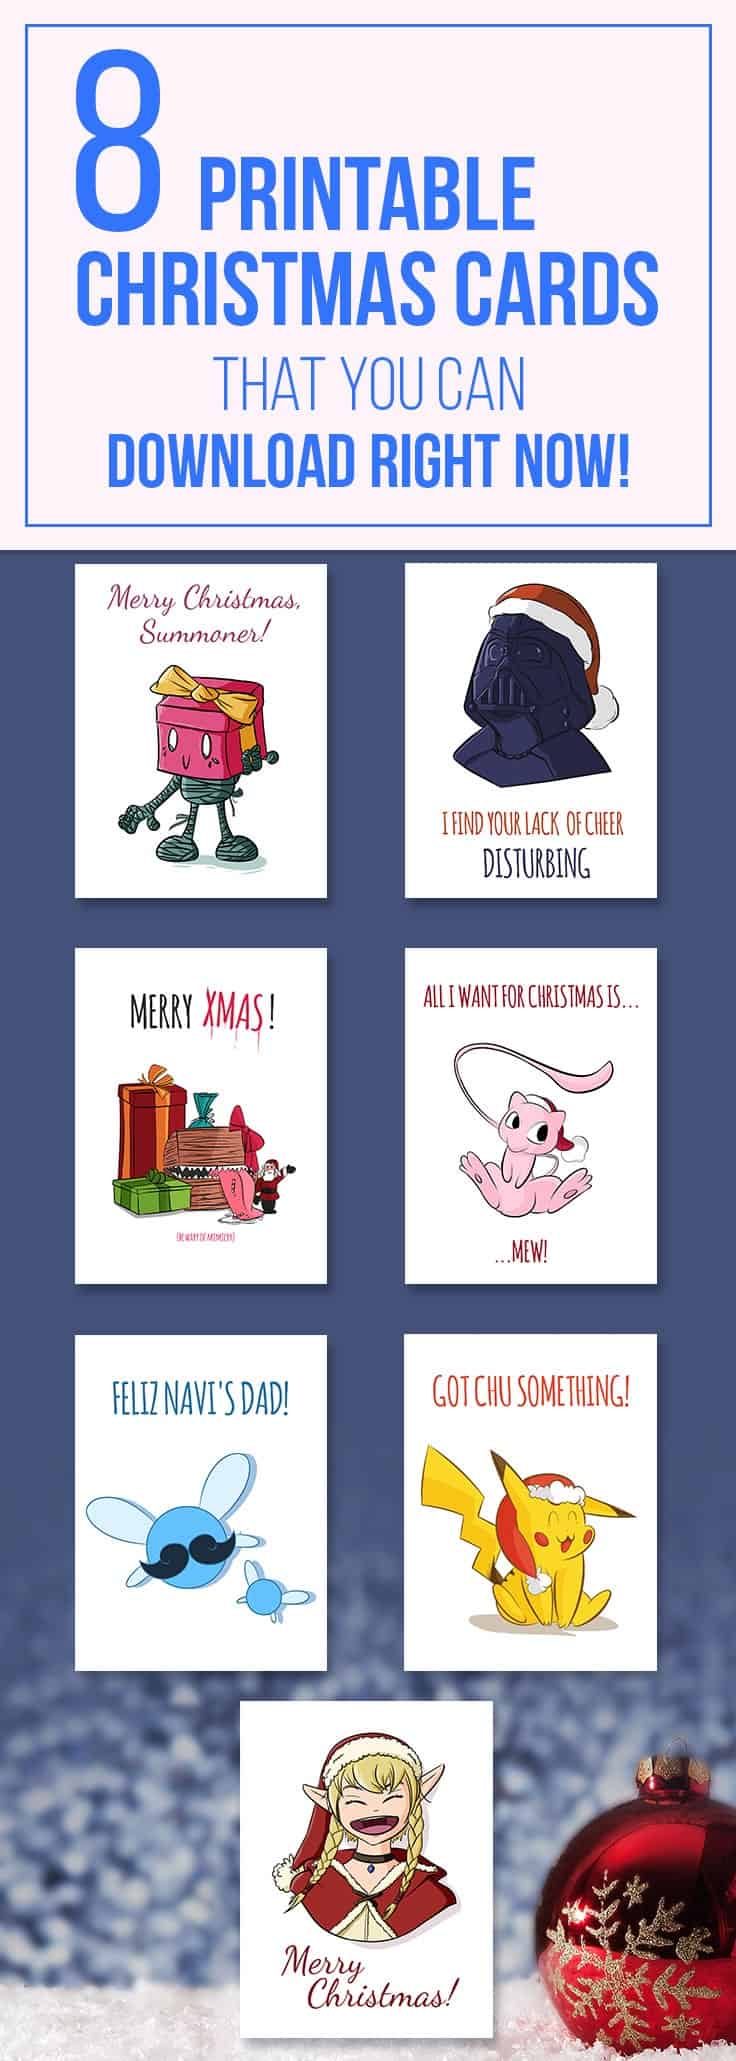 8 Printable Christmas Cards that you can Download Right NOW! by Don Corgi on Etsy